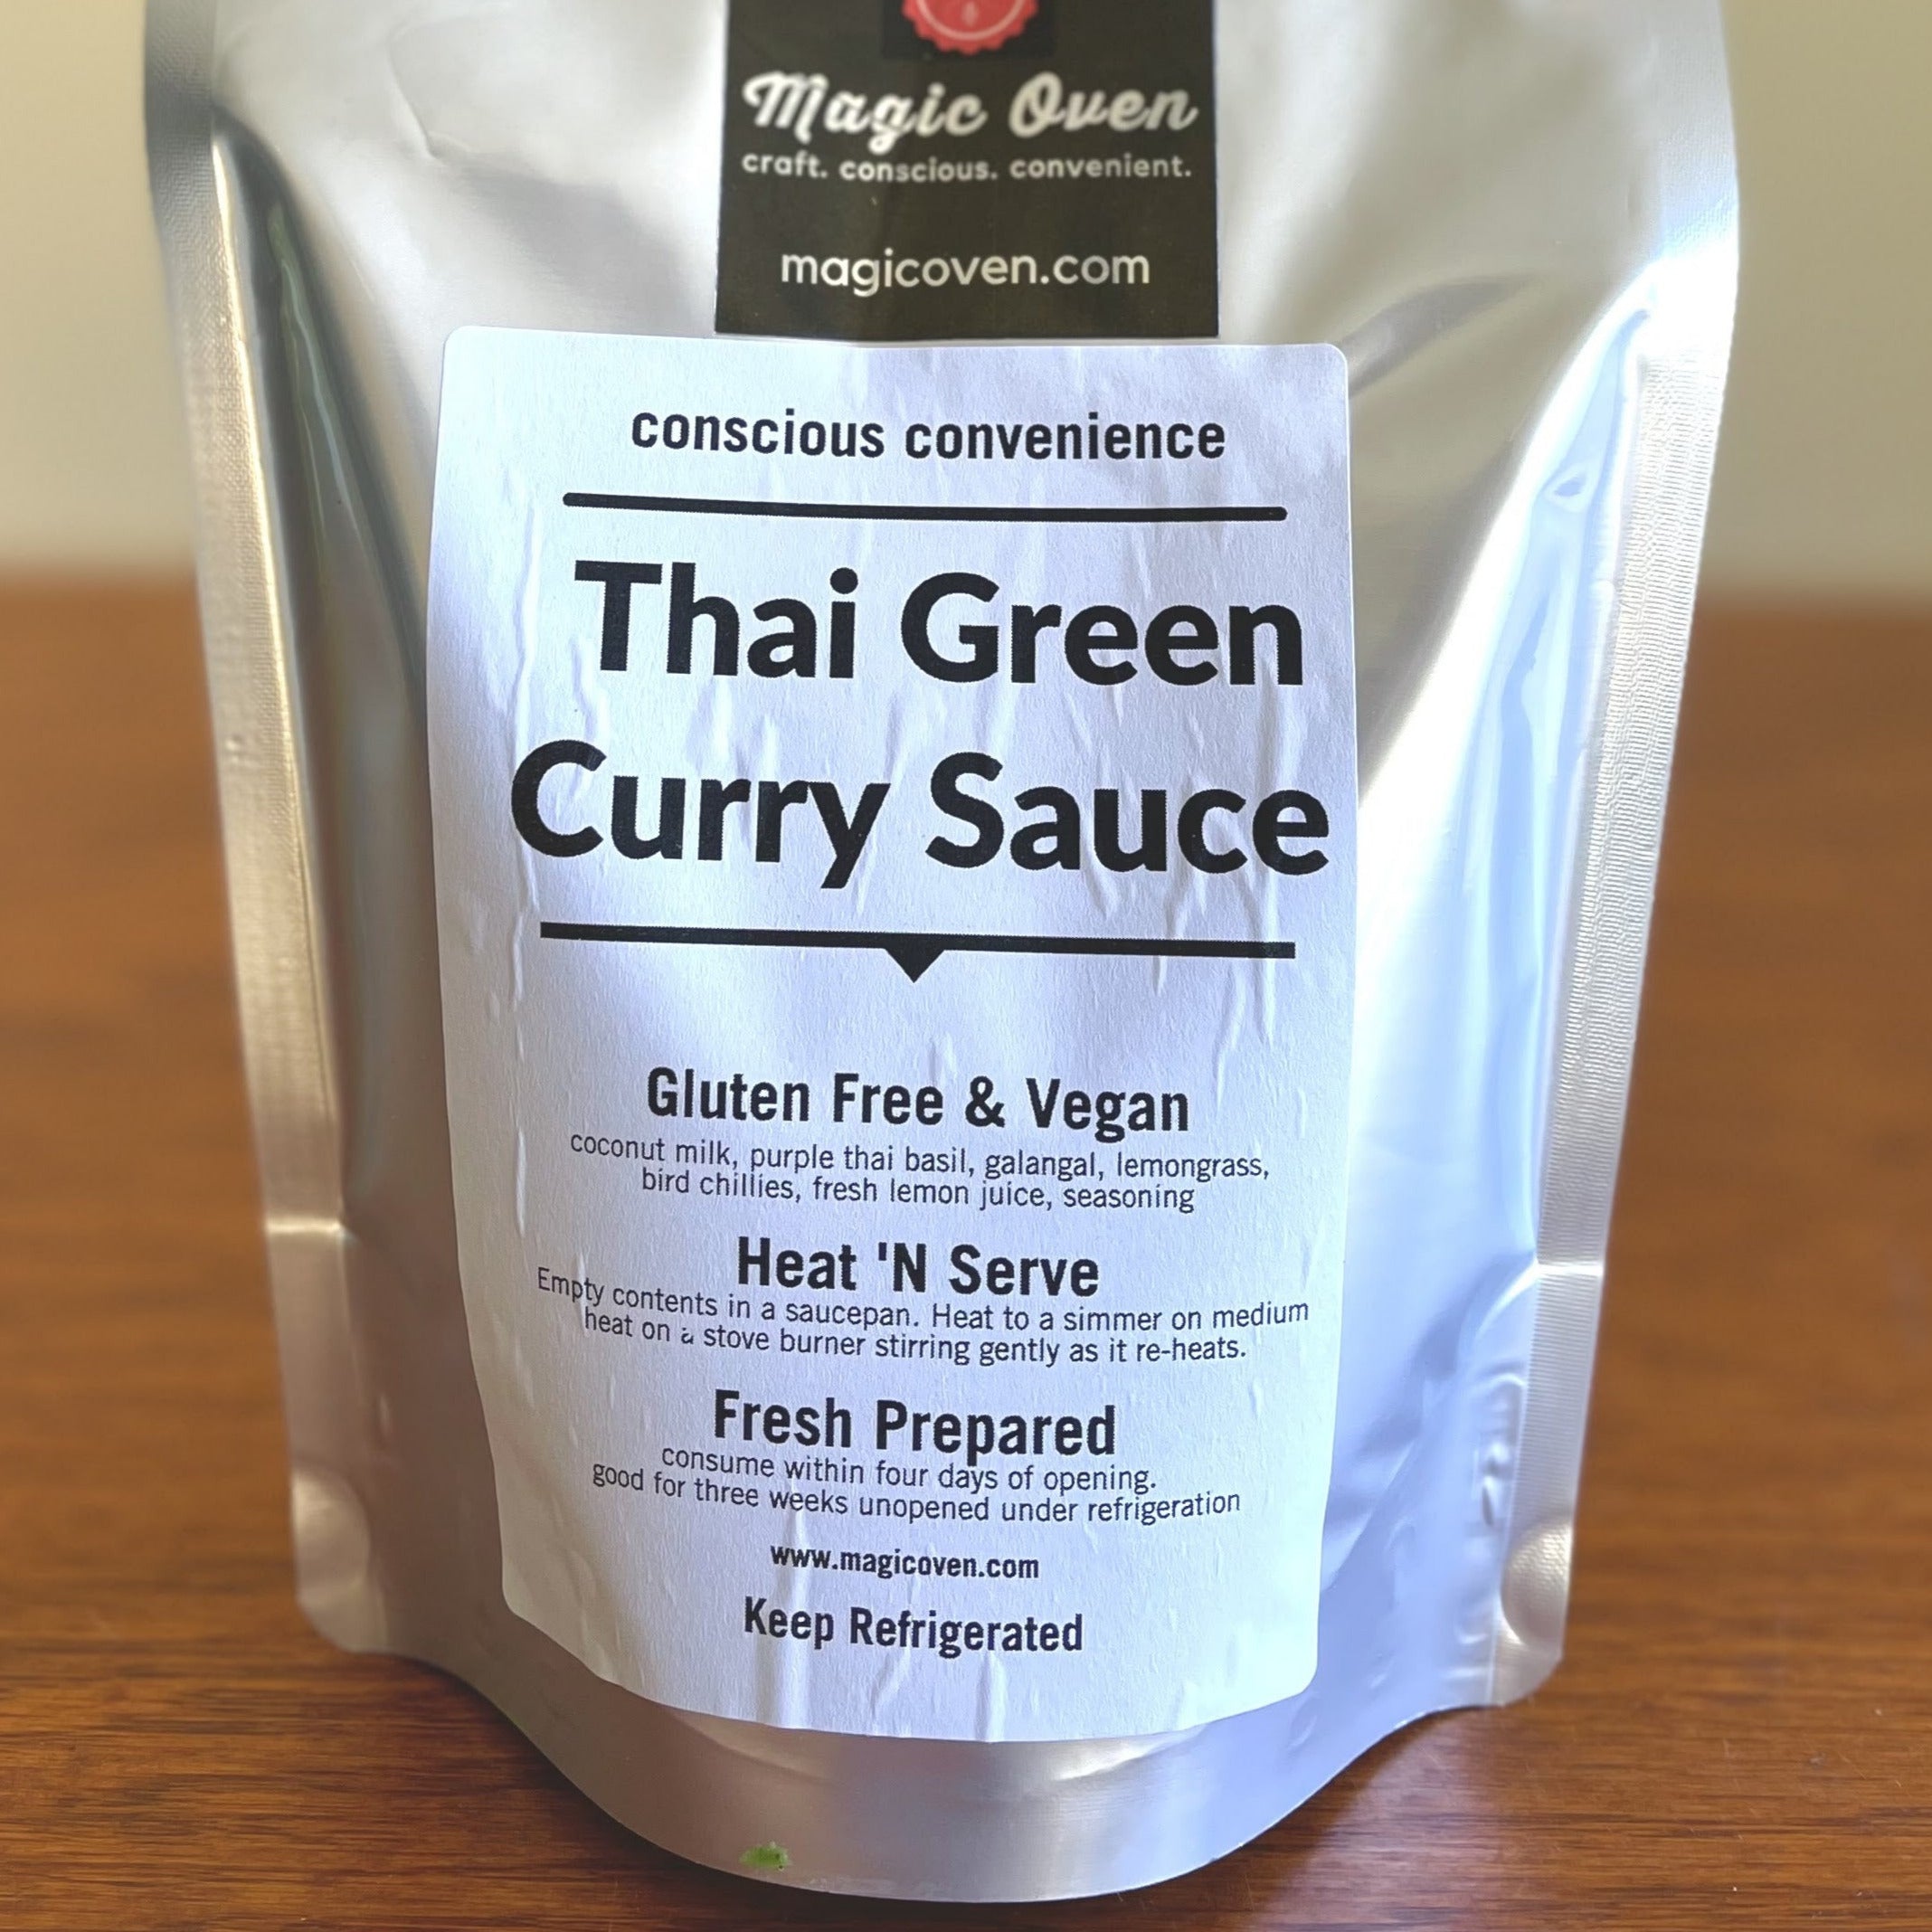 Pouch of Thai Green Curry Sauce. Text: Conscious convenience. Thai Green Curry Sauce. Gluten Free & Vegan: coconut milk, purple thai basiL, galangal, lemongrass, bird chillies, fresh lemon juice, seasoning. Heat 'N Serve: Empty contents in a saucepan. Heat to a simmer on medium heat on a stove burner stirring gently as it re-heats. Fresh Prepared: consume within four days of opening. Good for three weeks unopened under refrigeration. www.magicoven.com. Keep Refrigerated